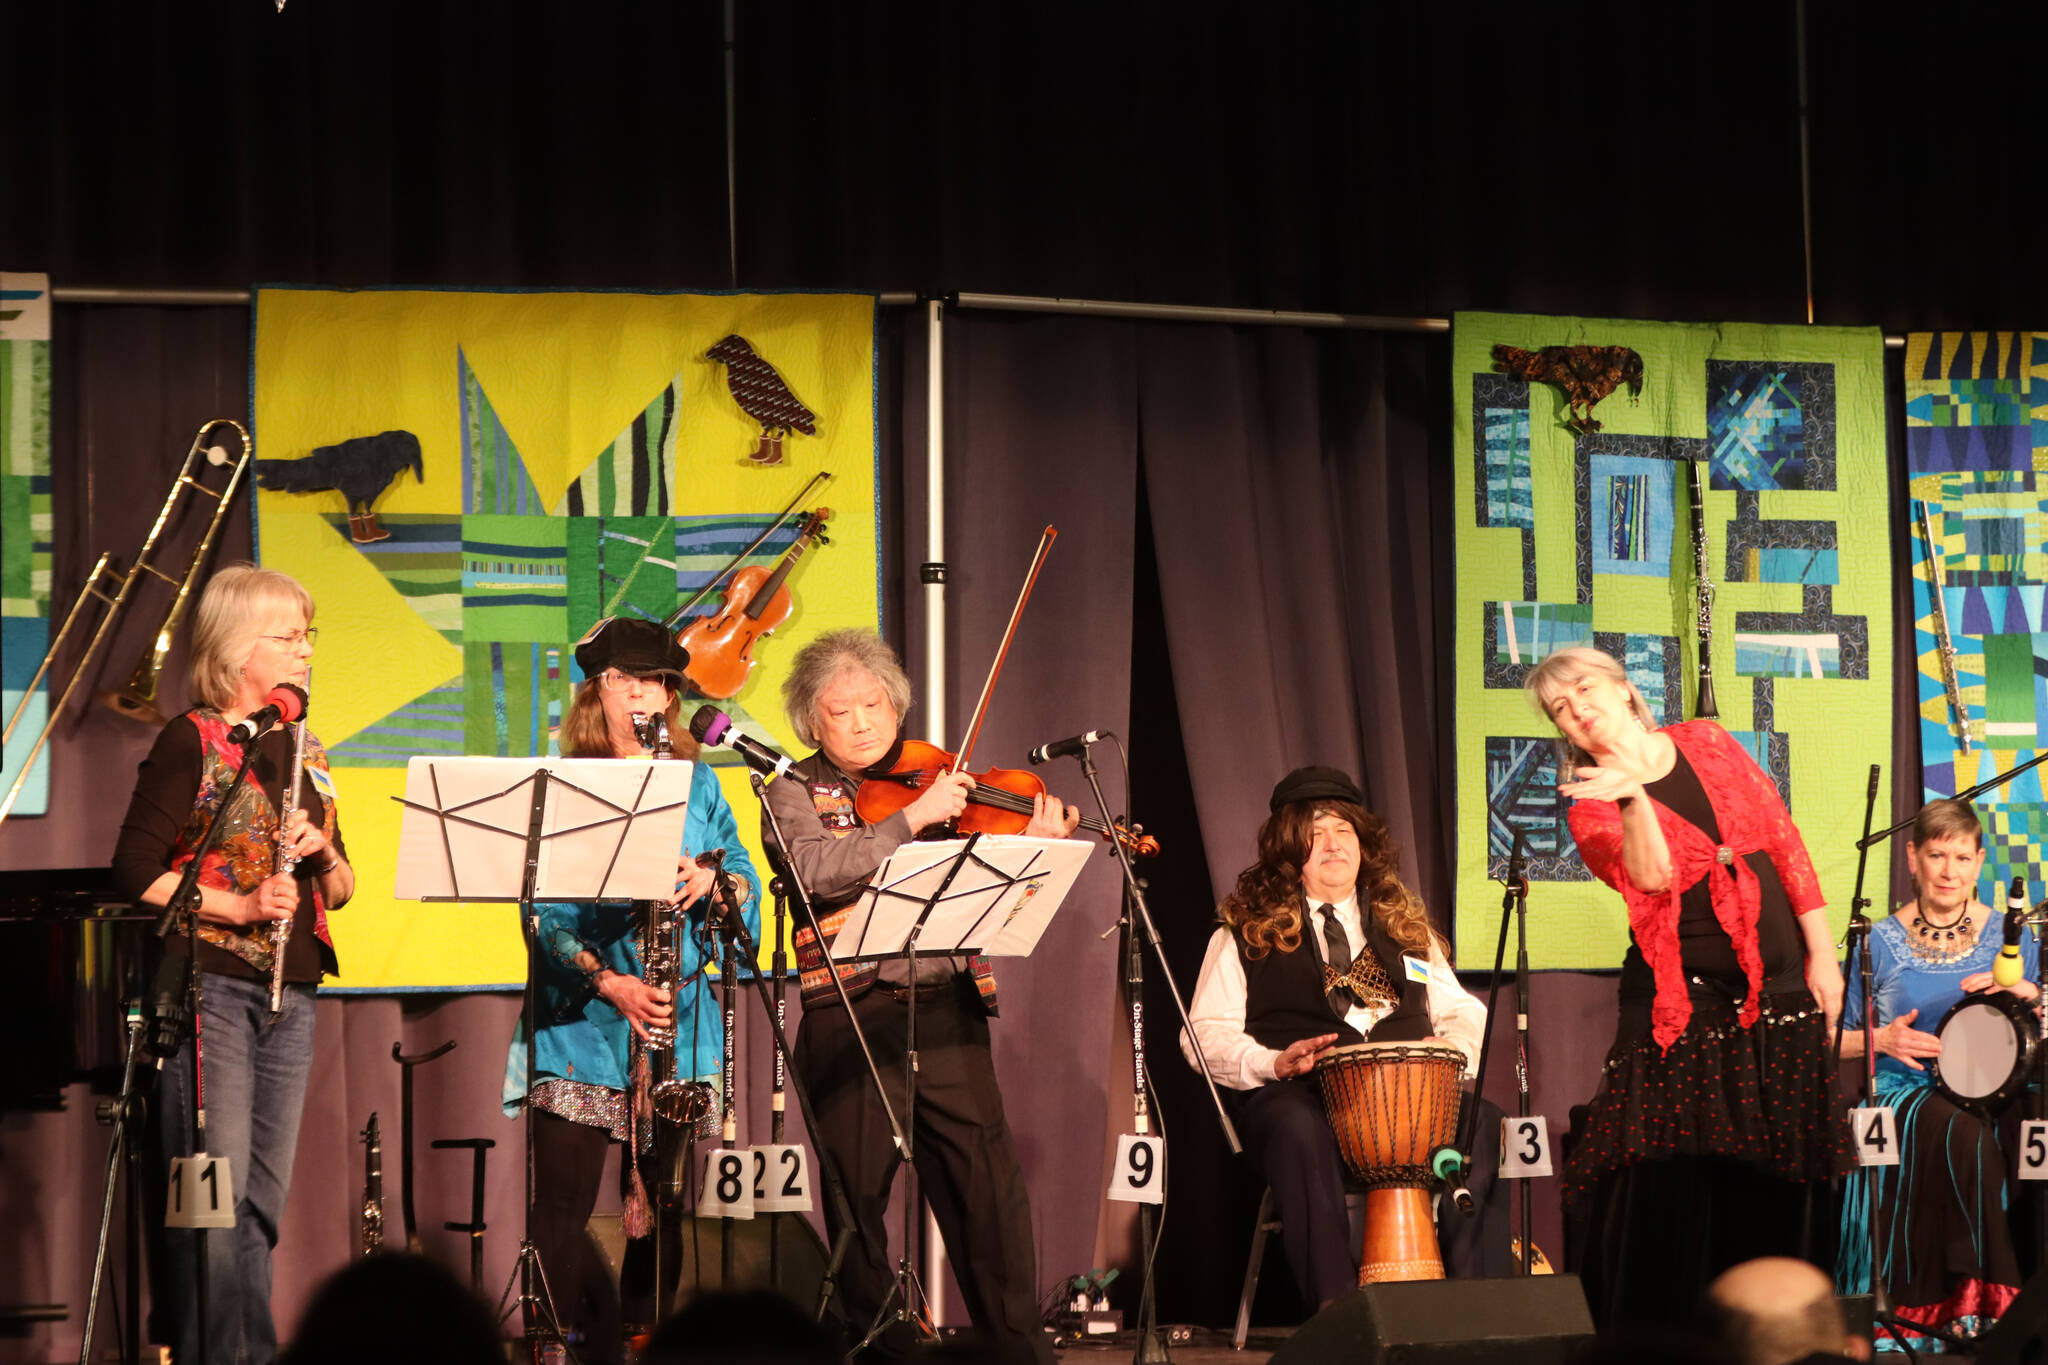 Beth Leibowitz, Cecily Morris, Jacque Farnsworth, Phyllis Scott, Steve Tada, Jean Butler, Delores O’Mara and Steve Winker of Escape from Brooklyn perform for the 48th Annual Alaska Folk Festival which kicked off on Monday at the Juneau Arts and Culture Center. (Jonson Kuhn / Juneau Empire)